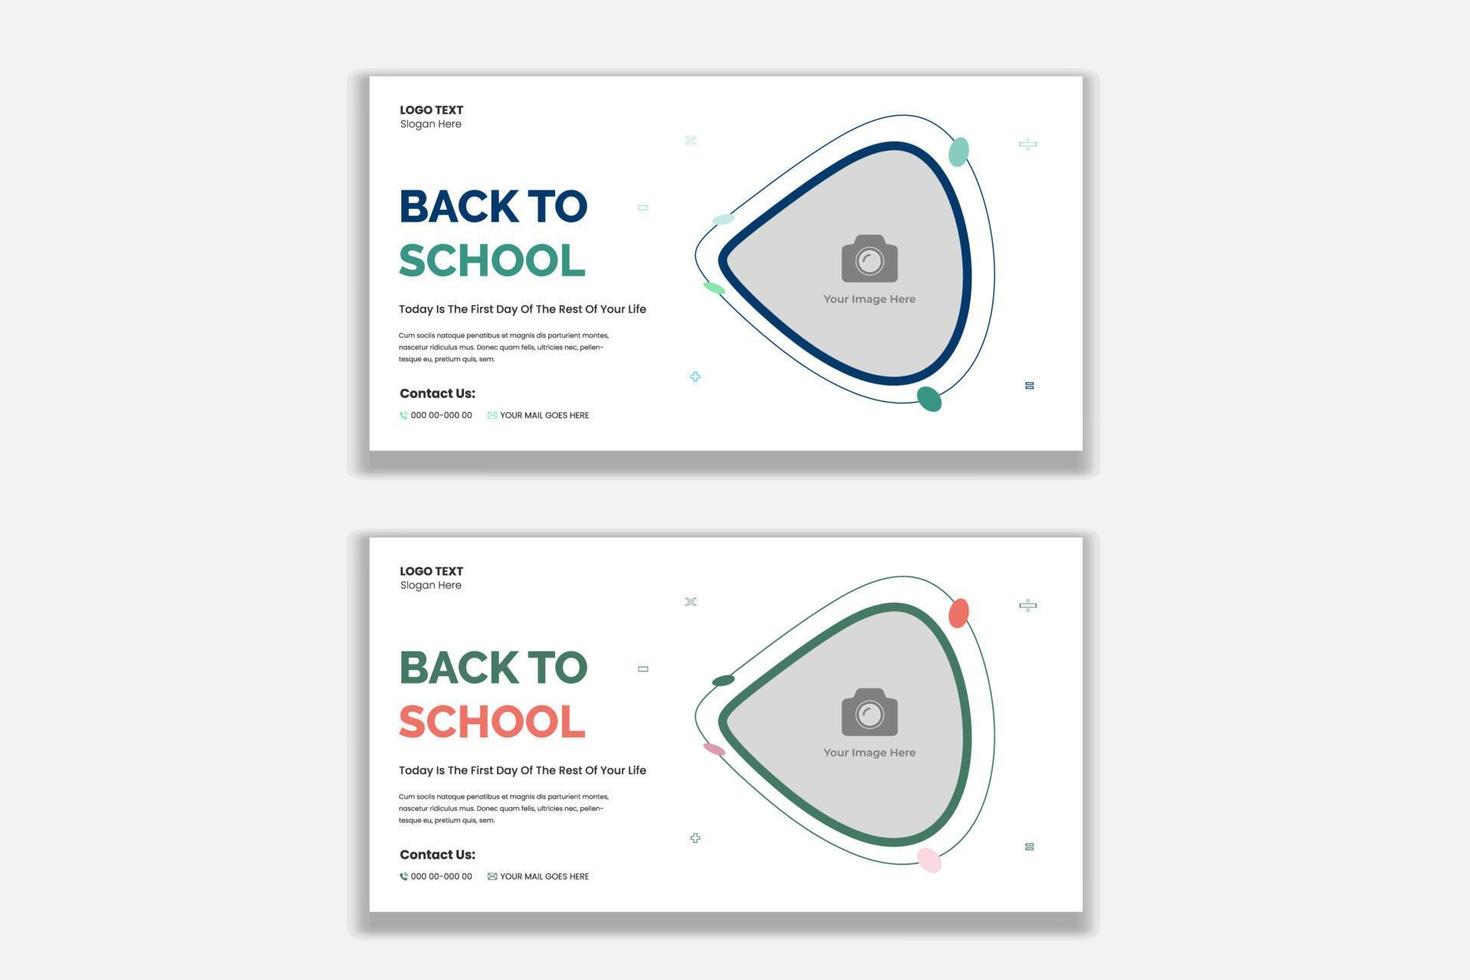 Back to school social media posts and web banner vector